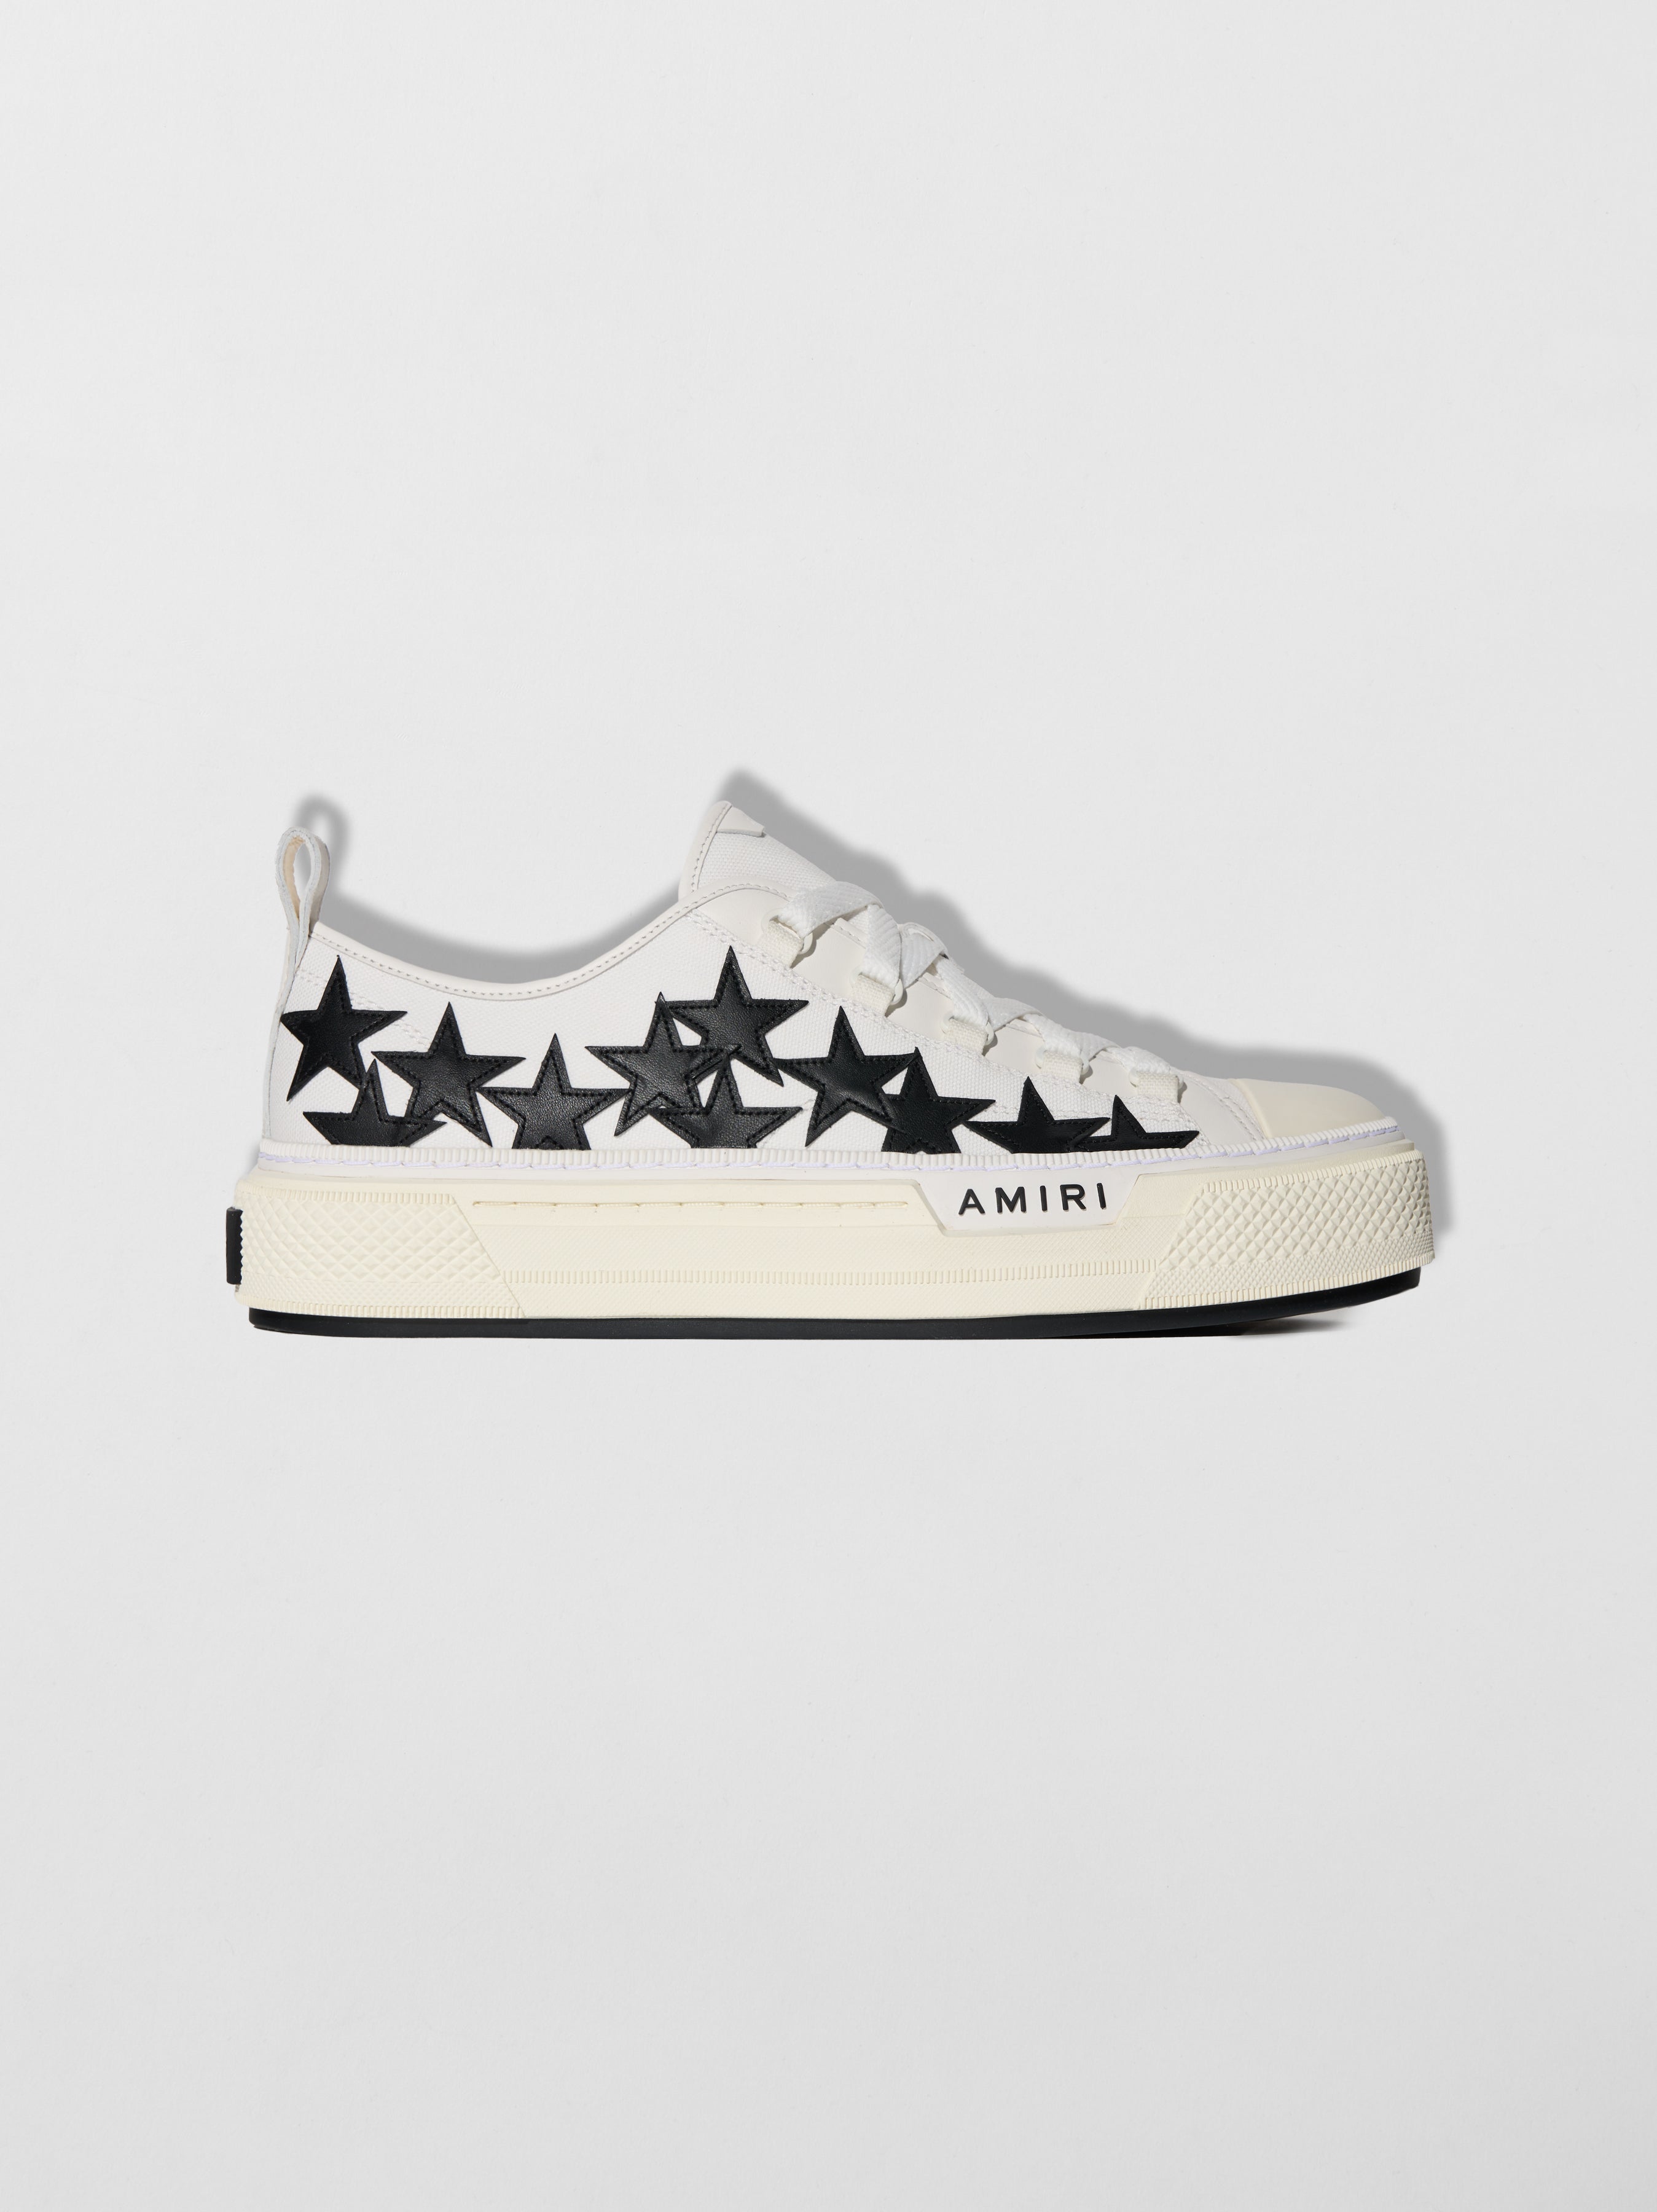 Product WOMEN- WOMEN'S STARS COURT LOW - WHITE/BLACK featured image